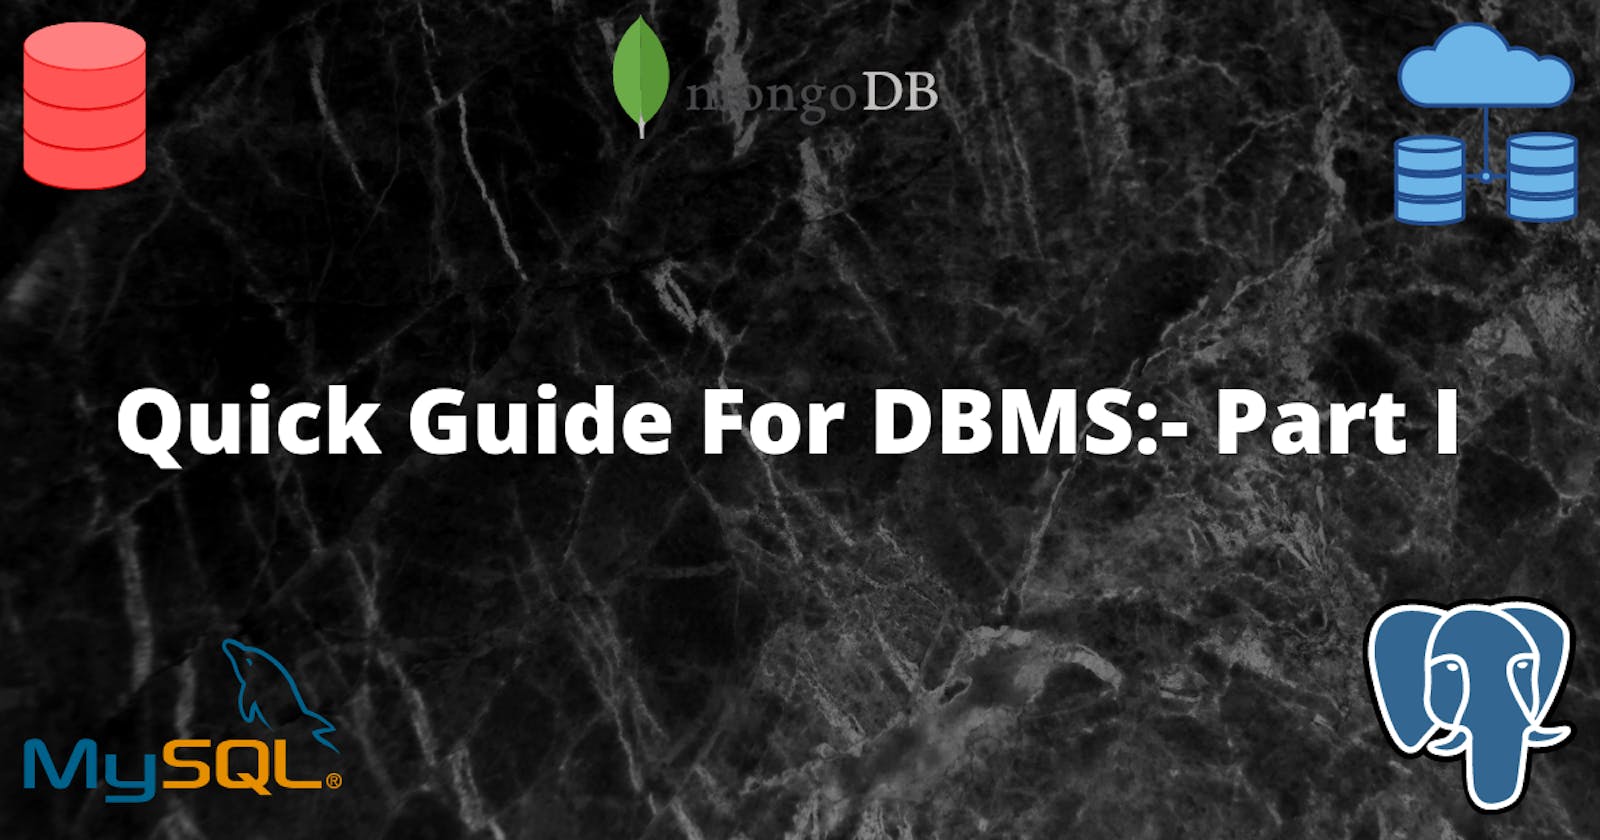 Quick Guide for DBMS:- Part I